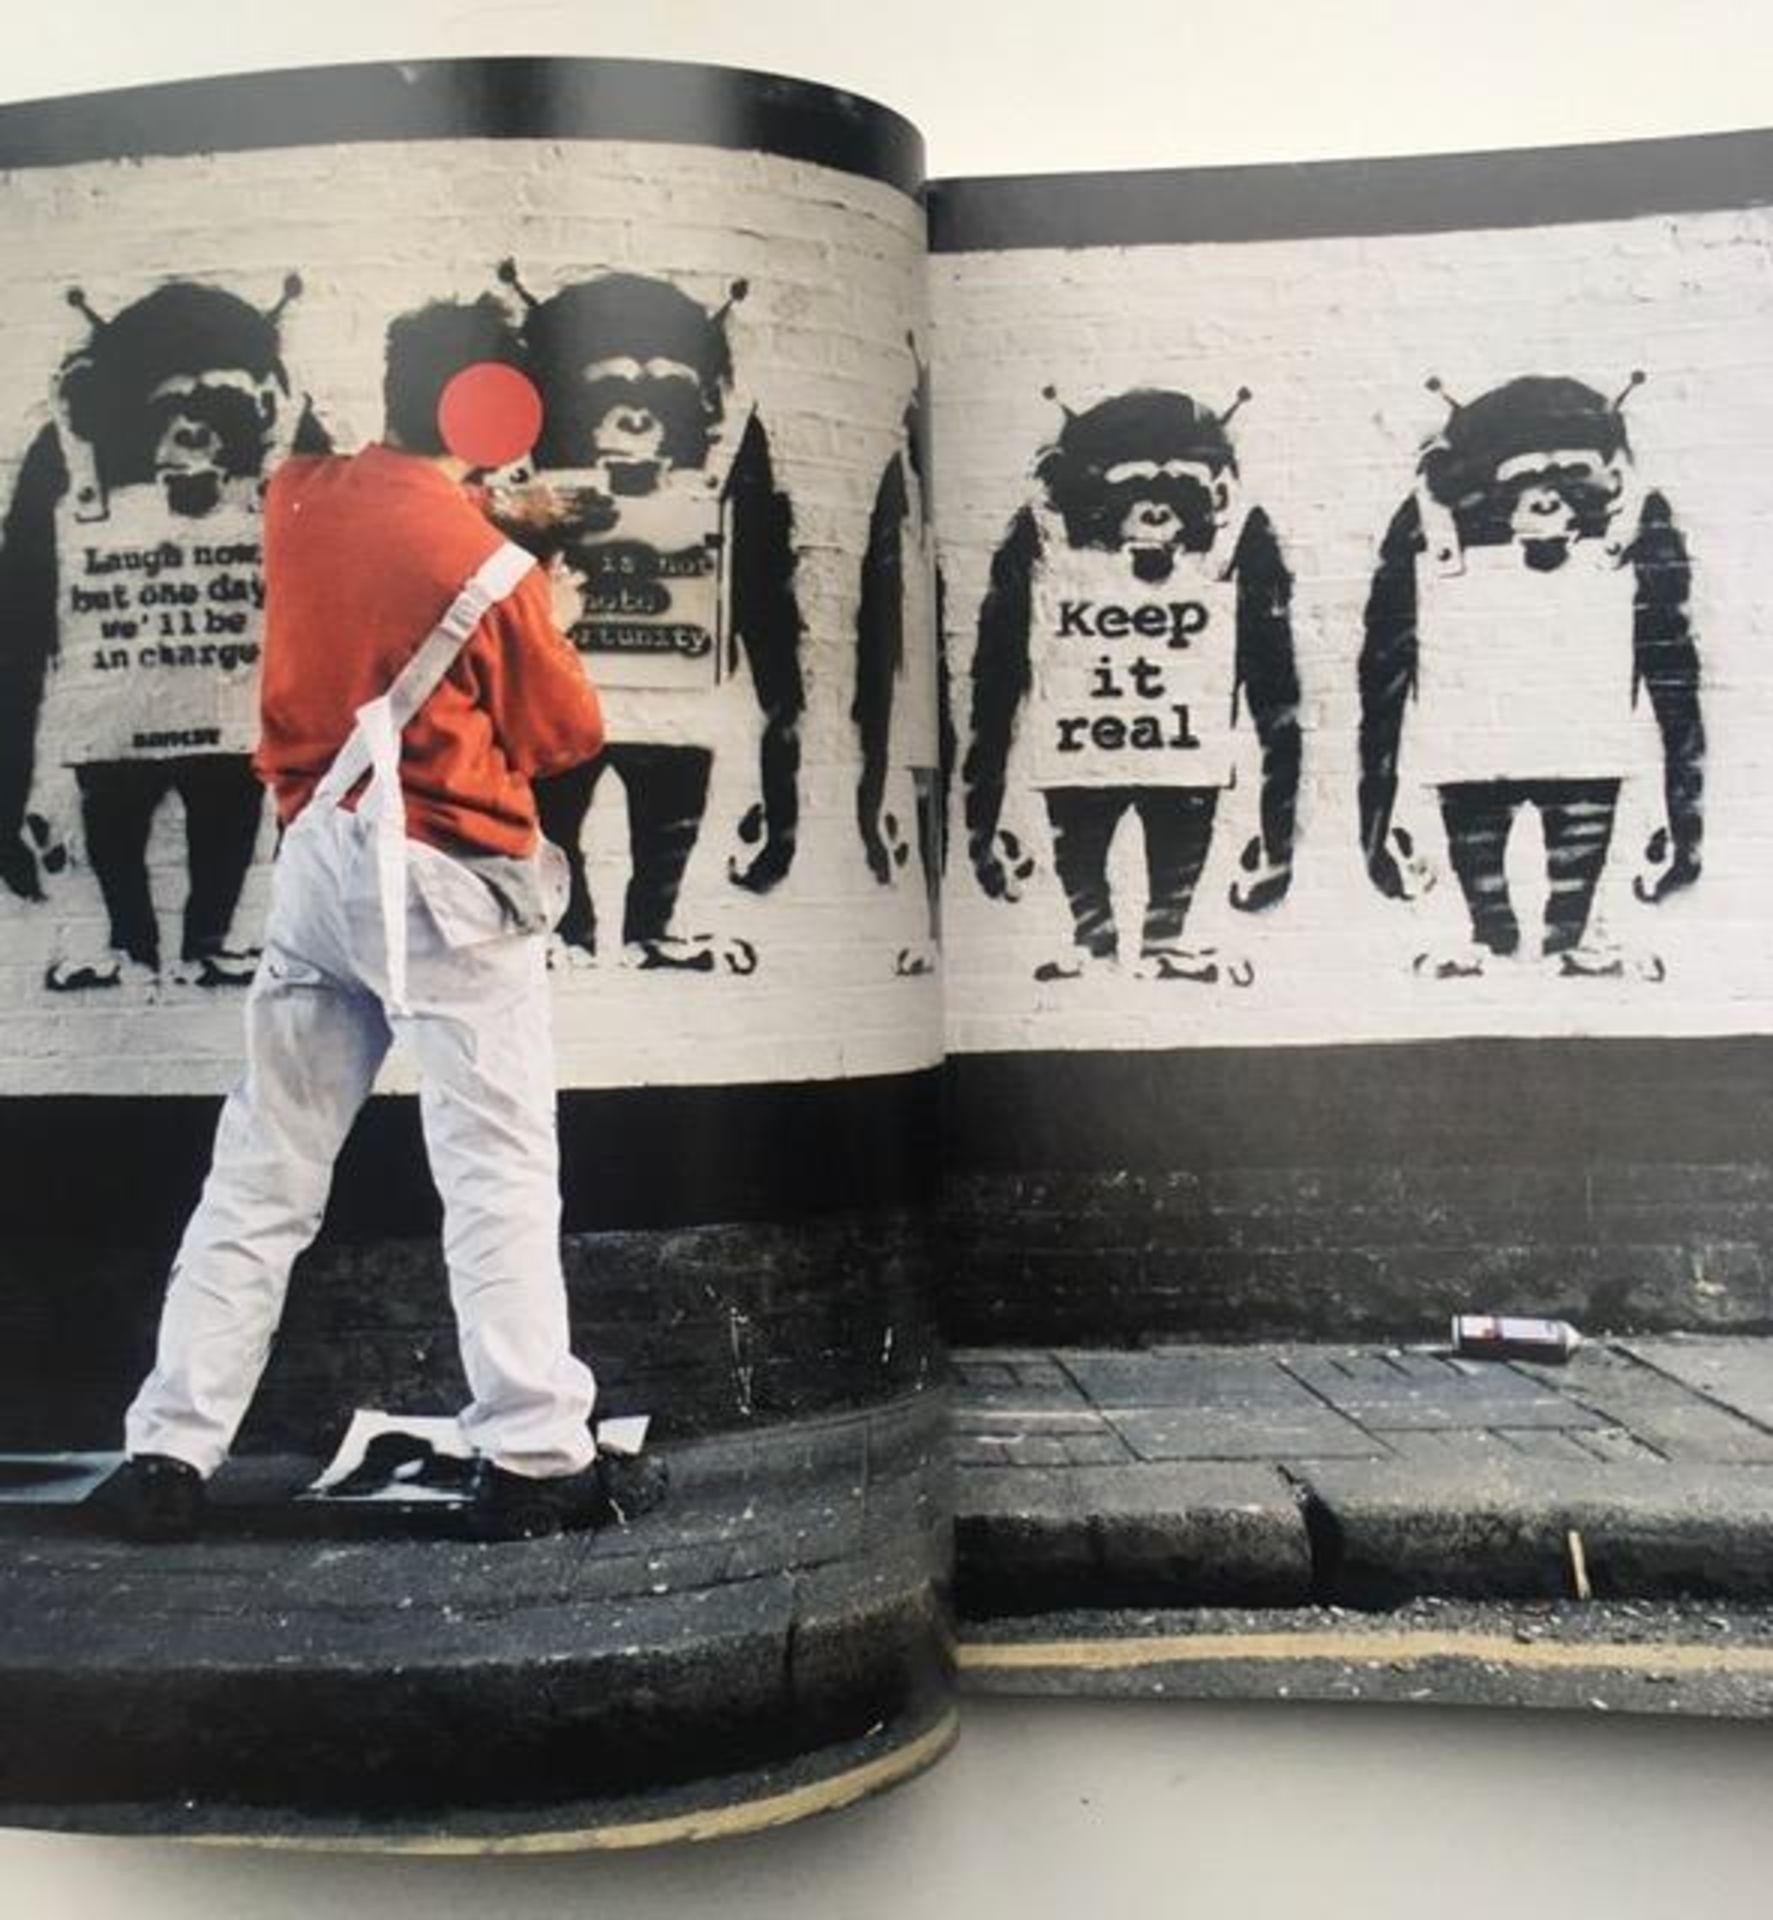 Banksy Captured, Volume 1 by Steve Lazarides, First Edition, Numbered 4102/5000, SOLD OUT - Image 12 of 21